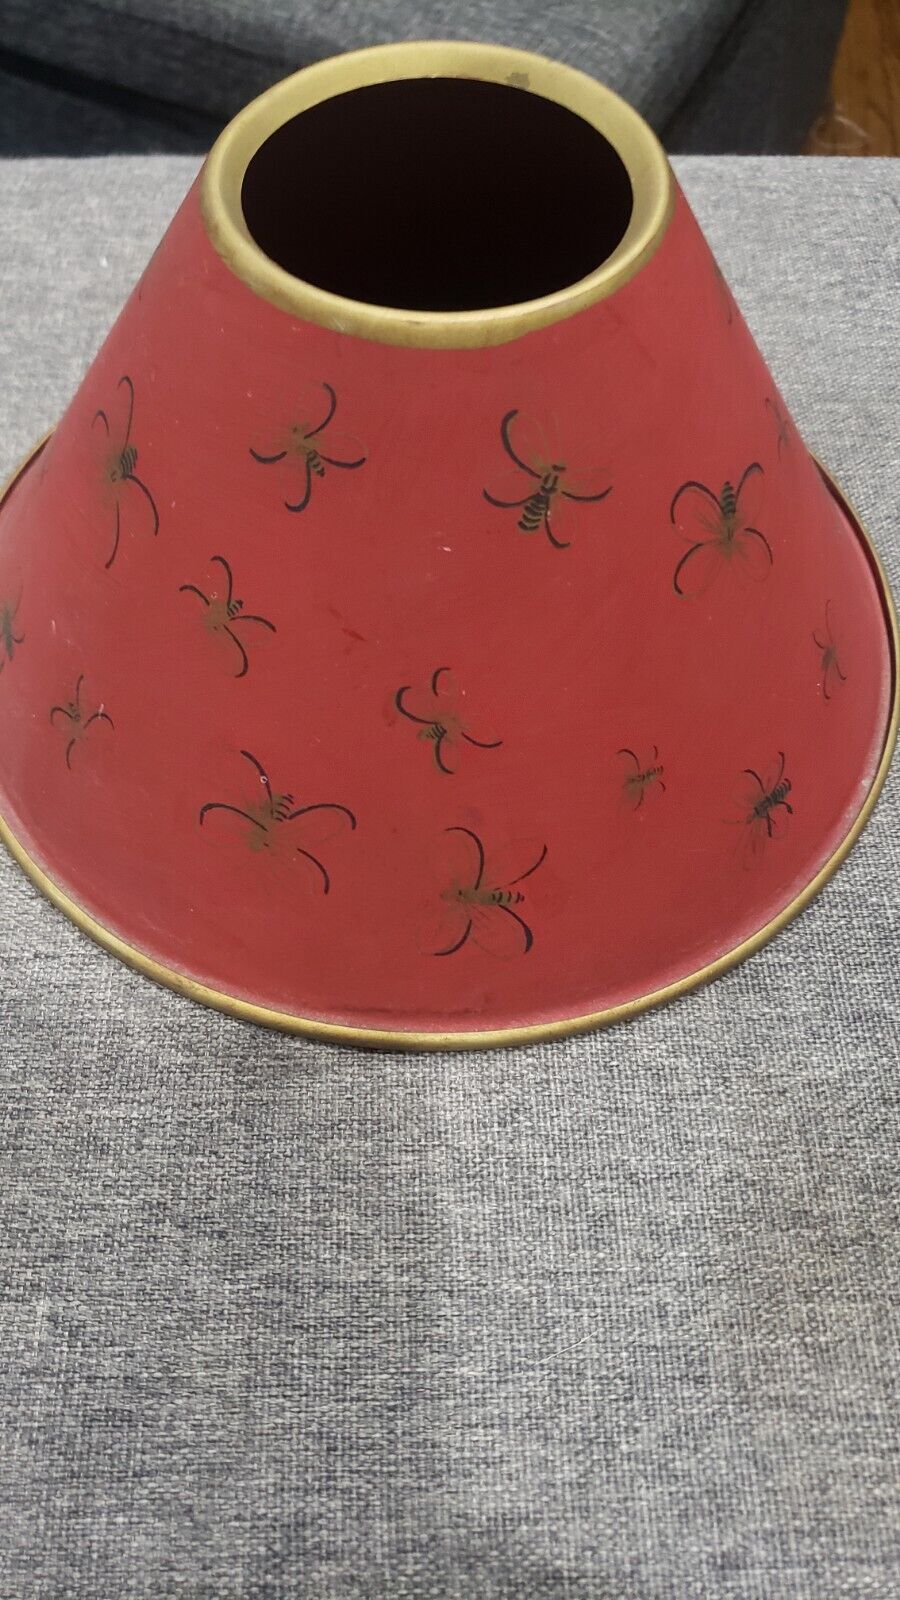  Vintage Bees Tole Metal Toleware Lamp Shade red table shade